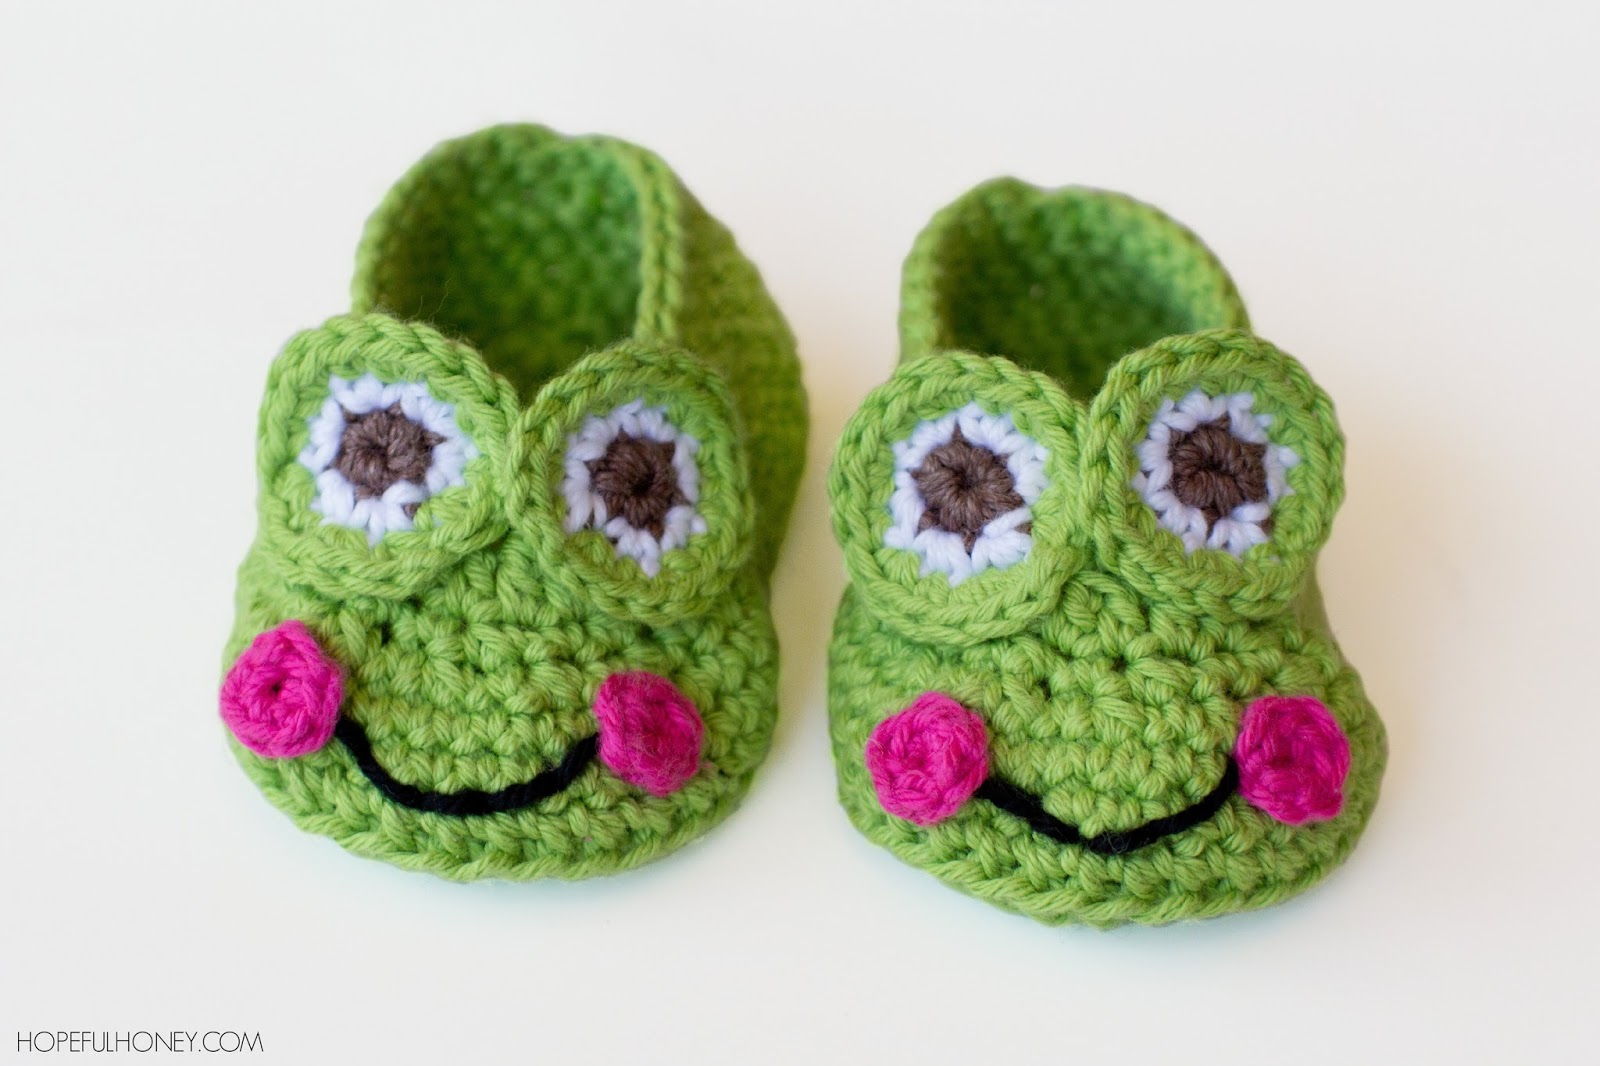 40+ Adorable and FREE Crochet Baby Booties Patterns --> Crochet Frog Baby Booties